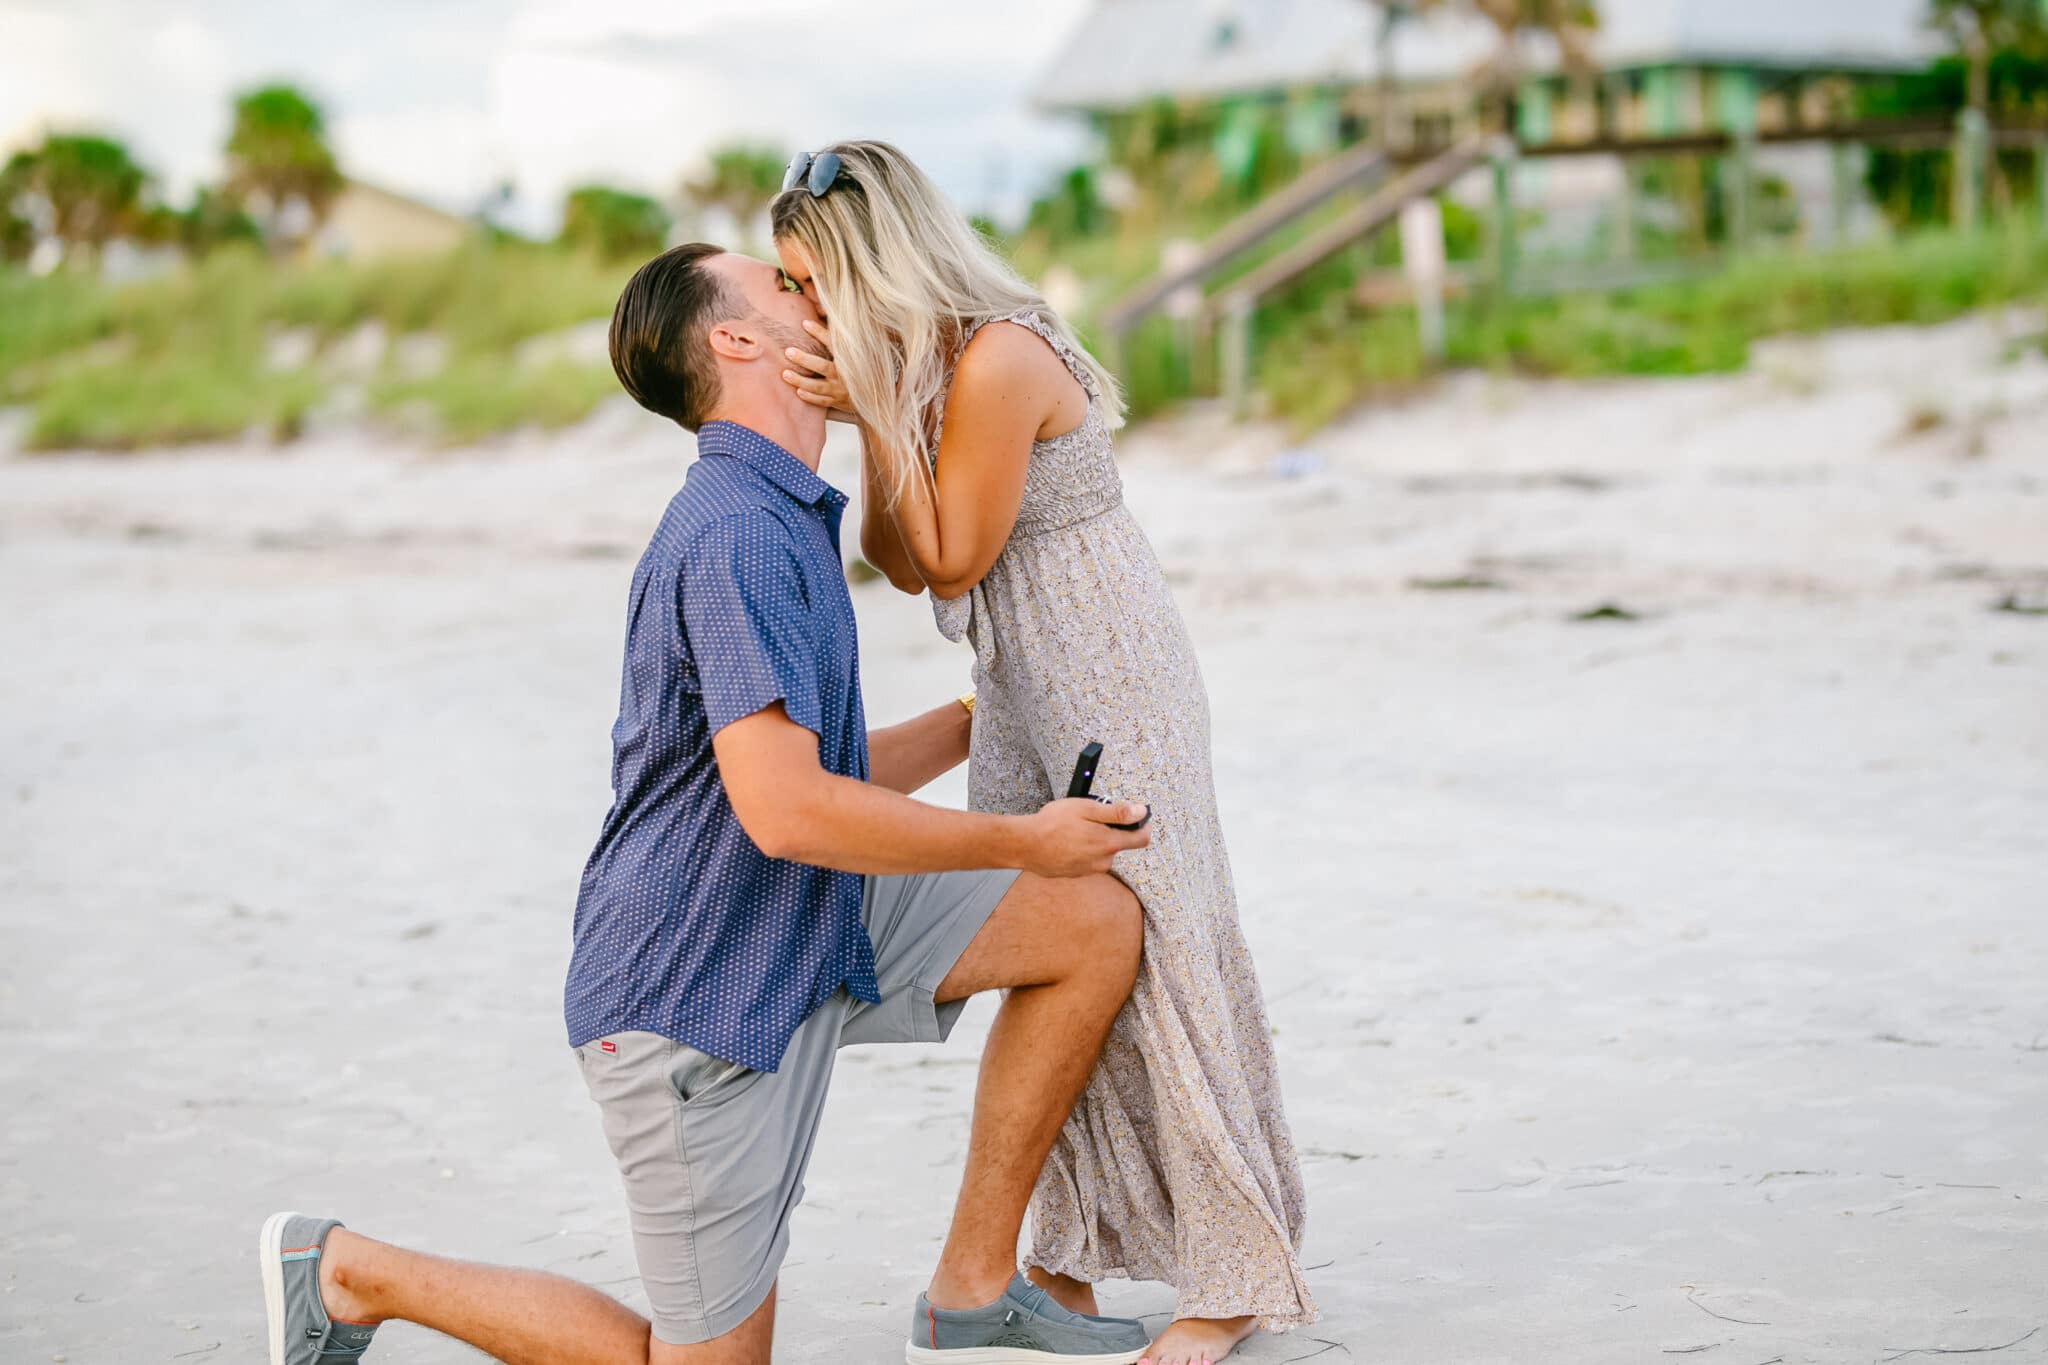 bride and groom to be kissing on the beach while the groom is still on one knee after proposing.